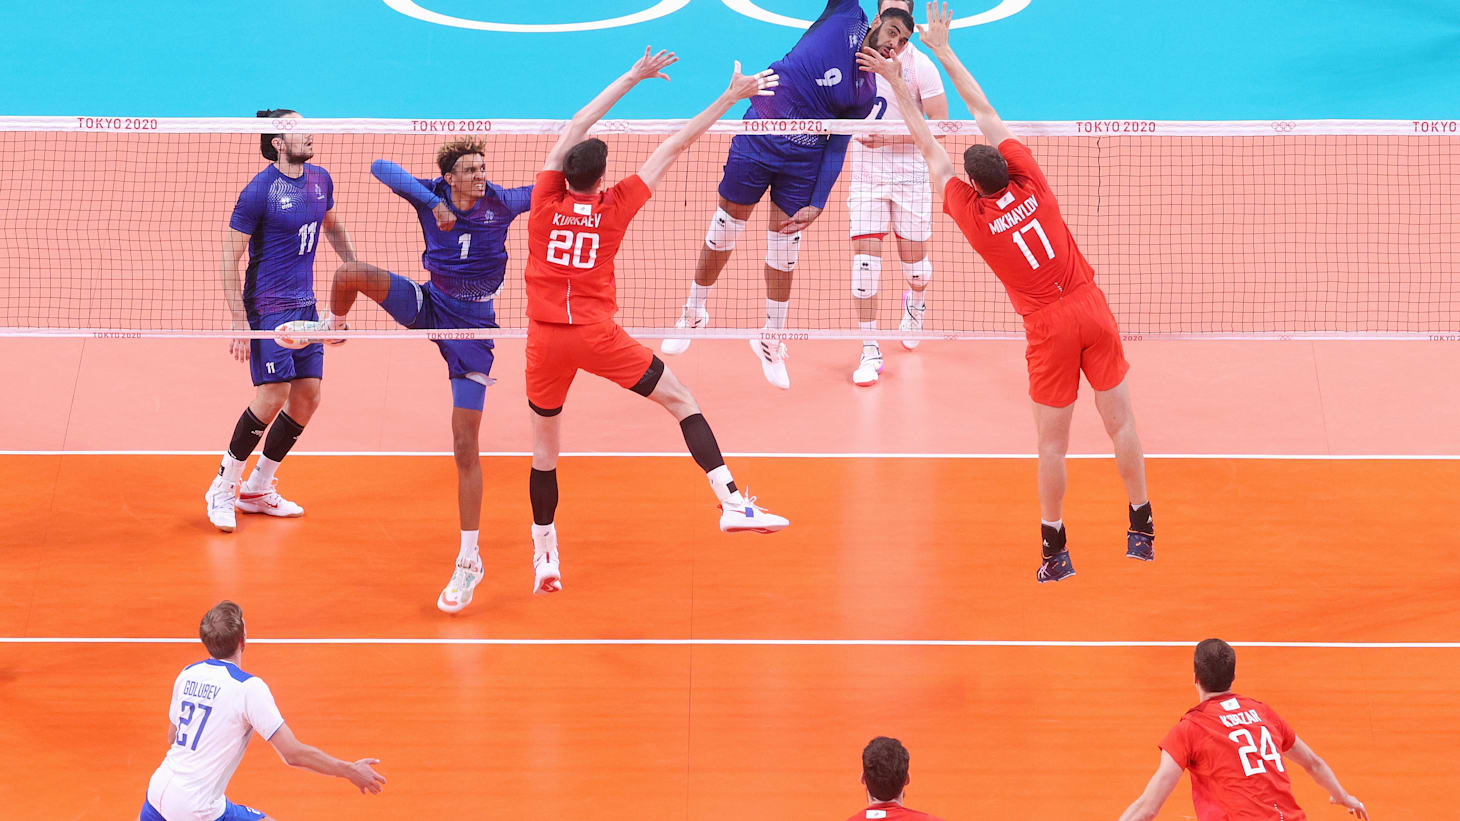 volleyball nations league 2022 live stream free